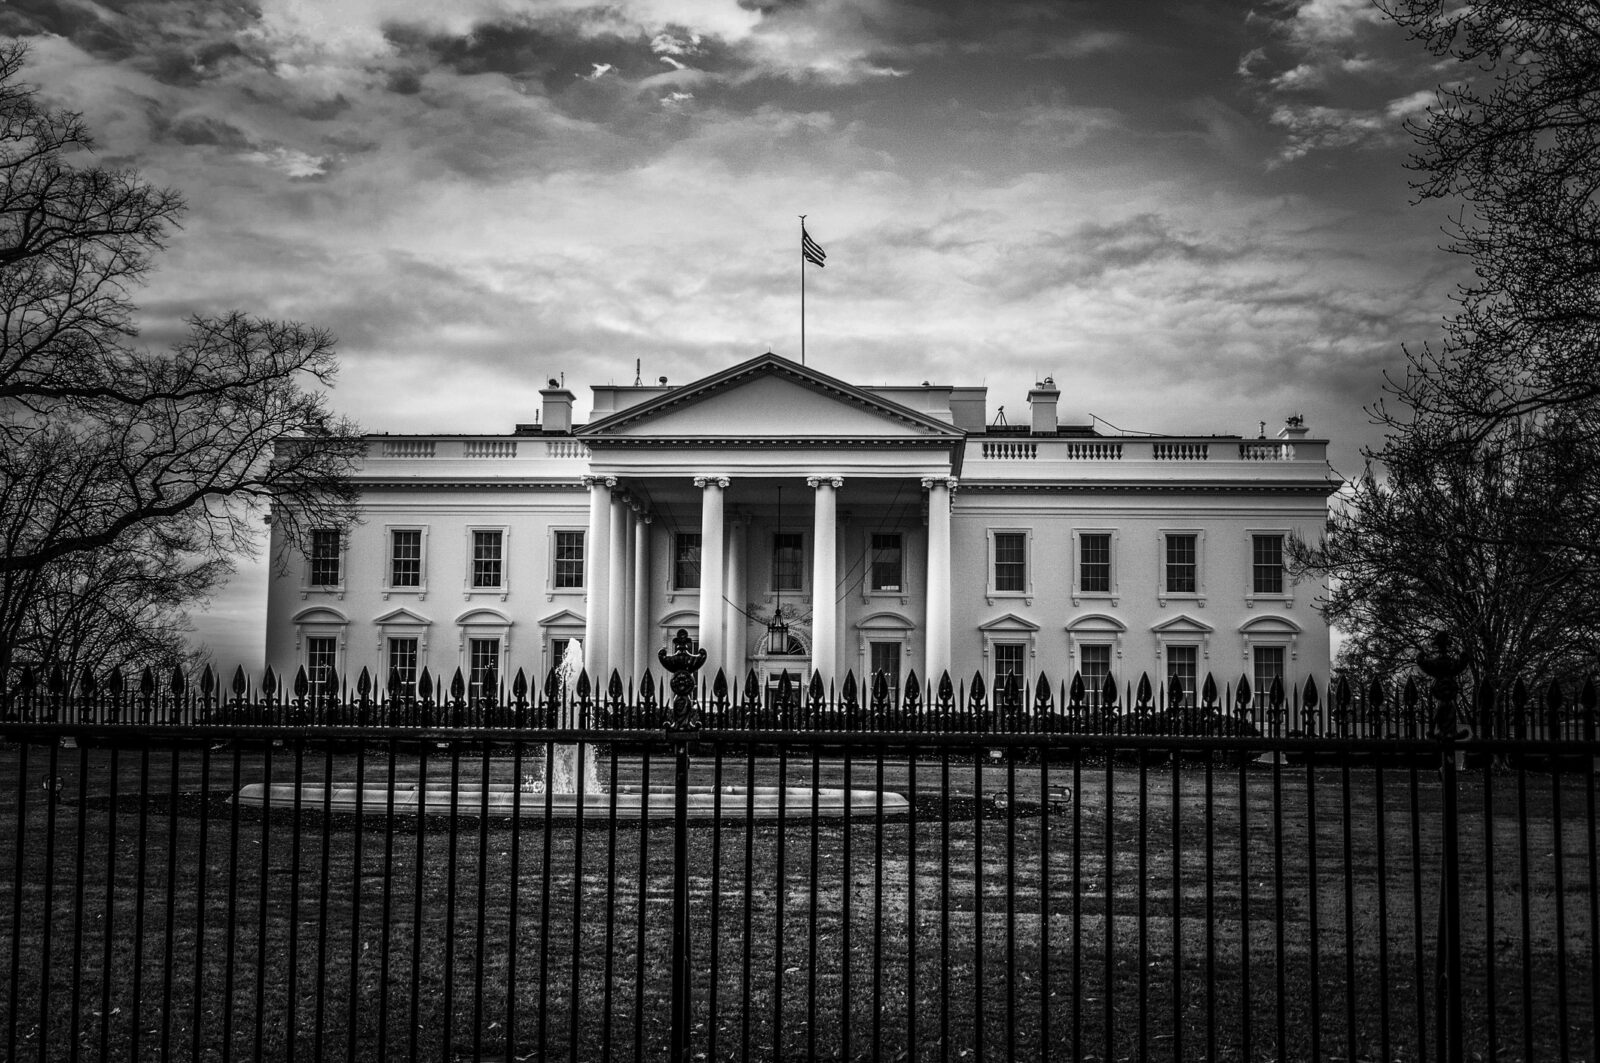 View of the front entrance to the White House in Washington DC with iron fence in the foreground